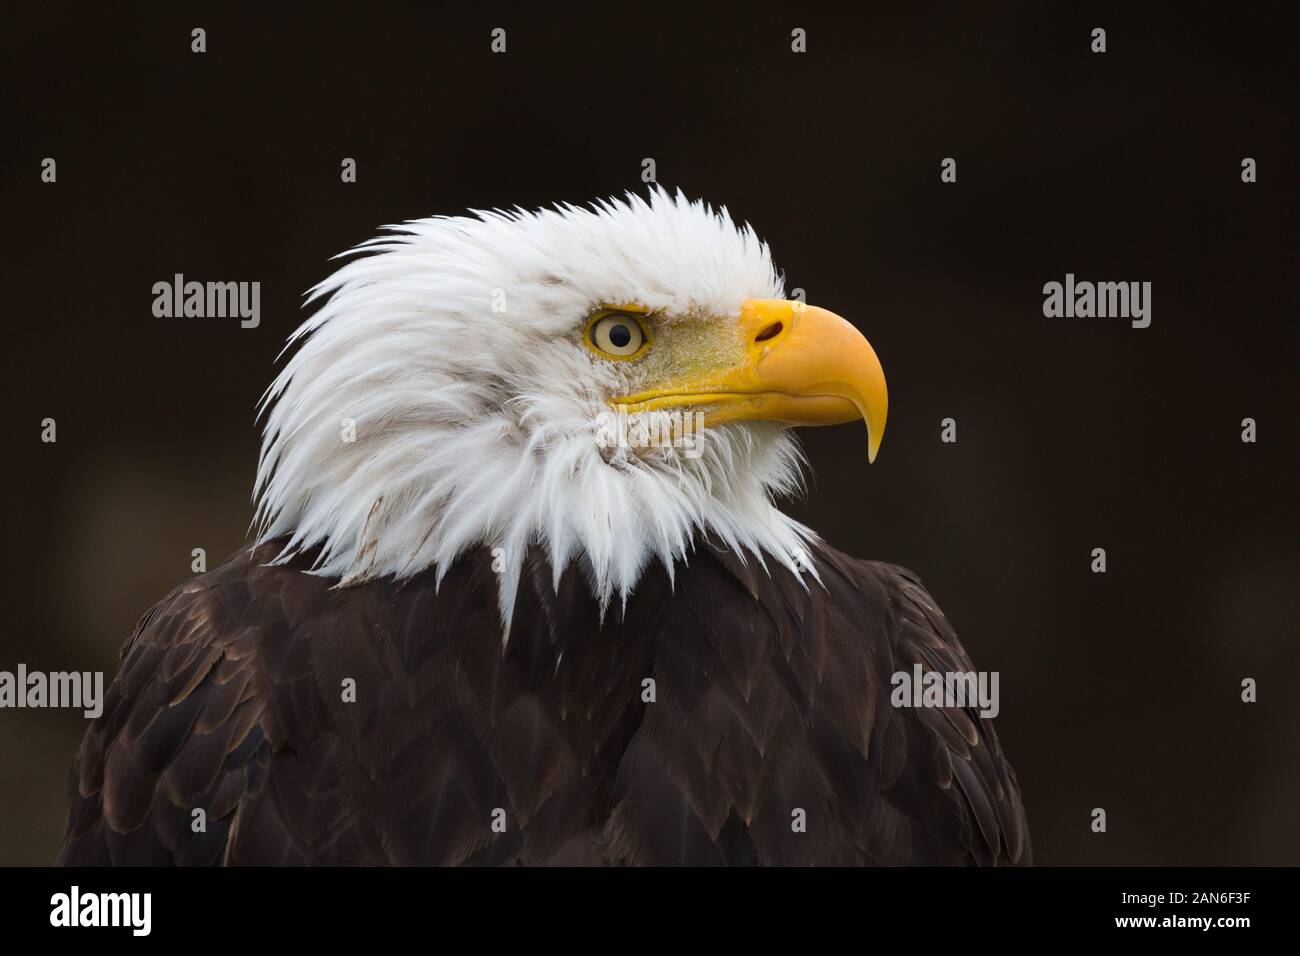 Close-up / profile of bald eagle. Portrait with head facing to the right. Detailed view on beak, eye, feathers. National Symbol of the USA. Stock Photo